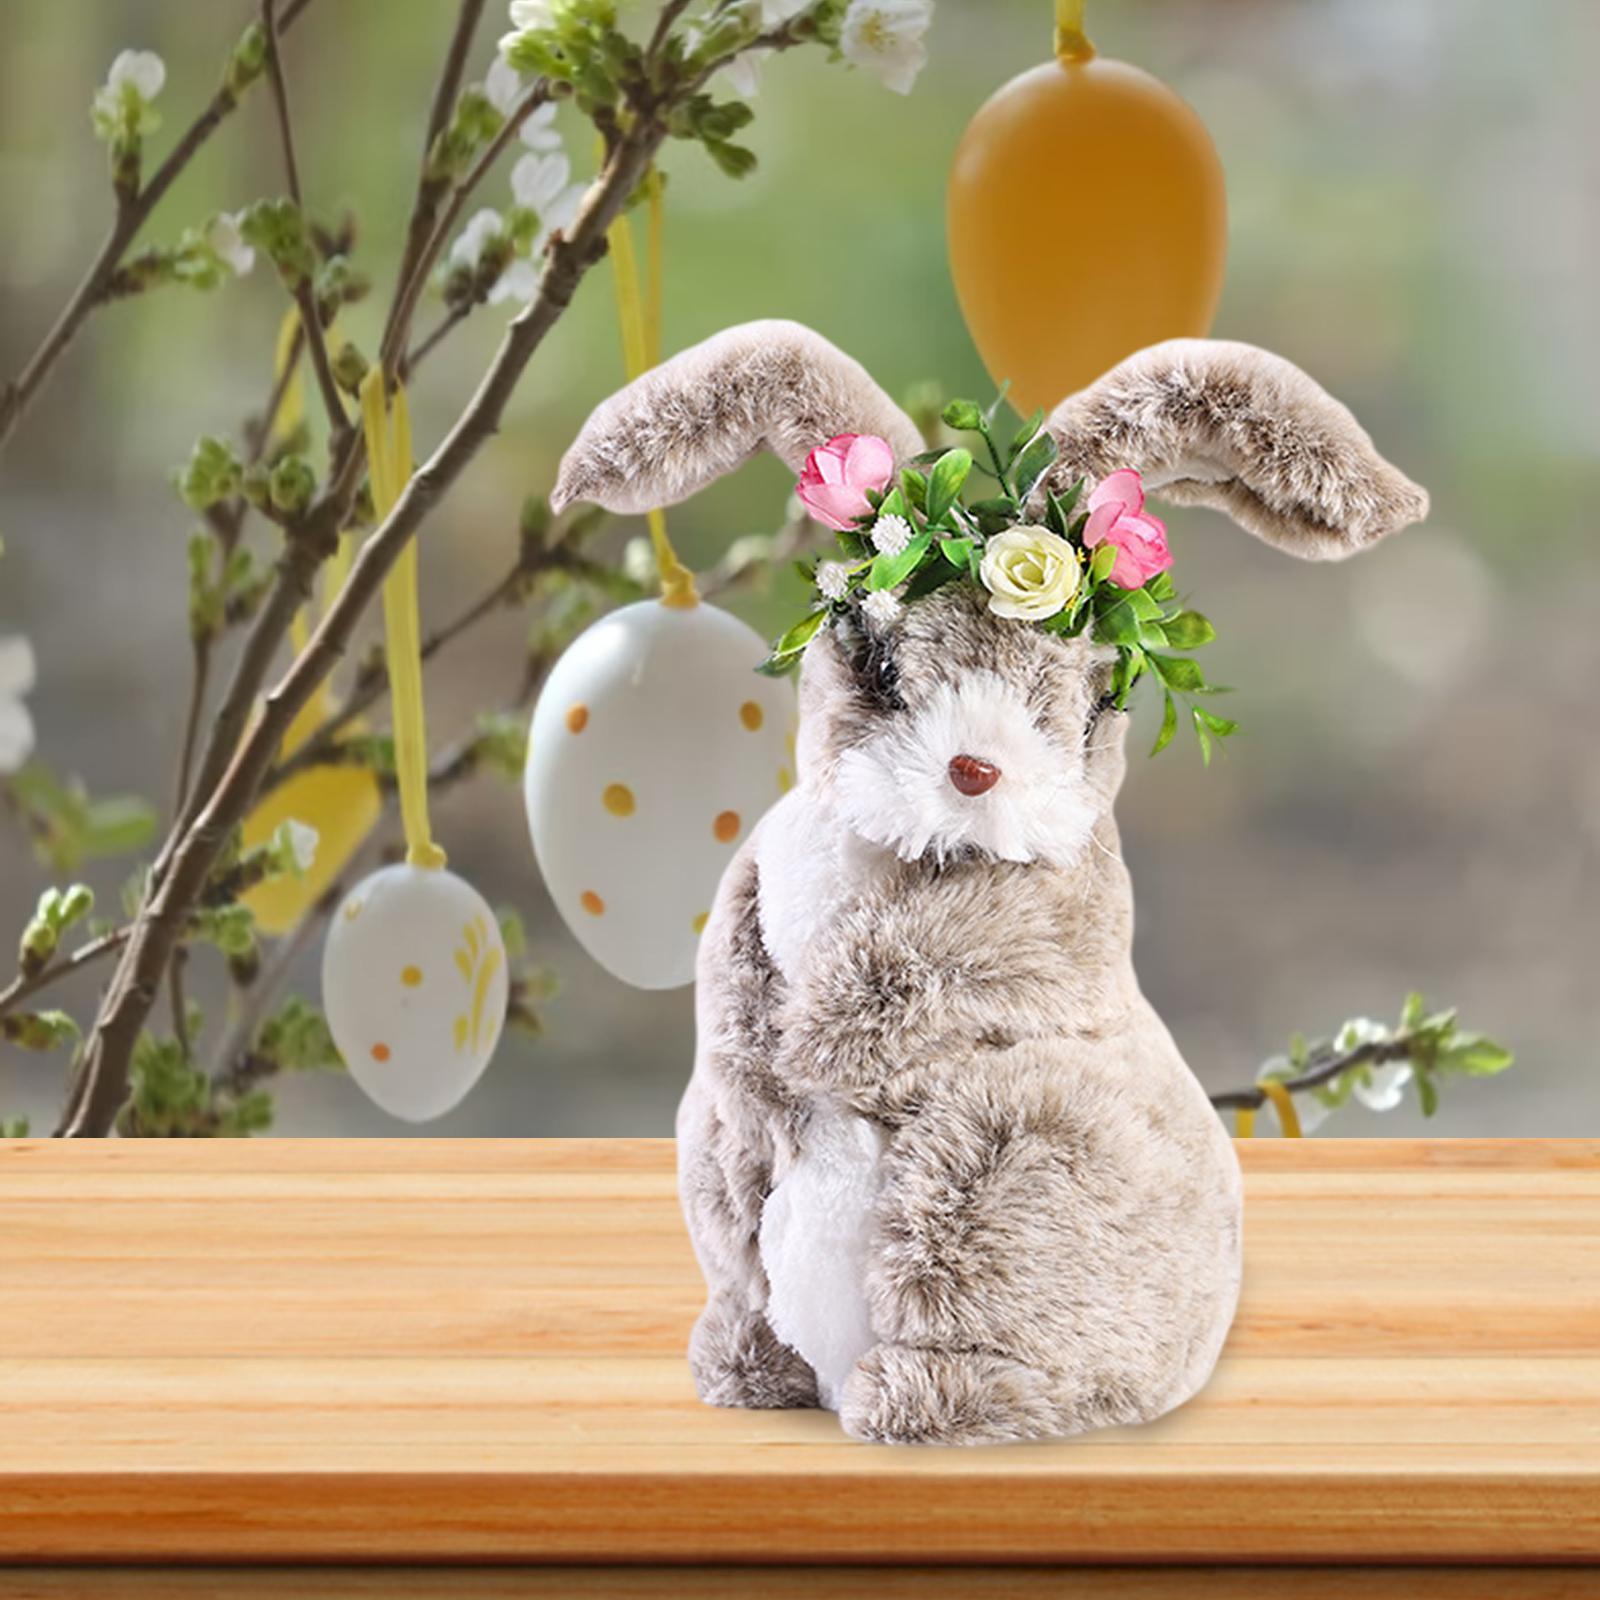 Soft Easter Rabbit with Wreath Photo Props Art for Outdoor Desk Ornament A